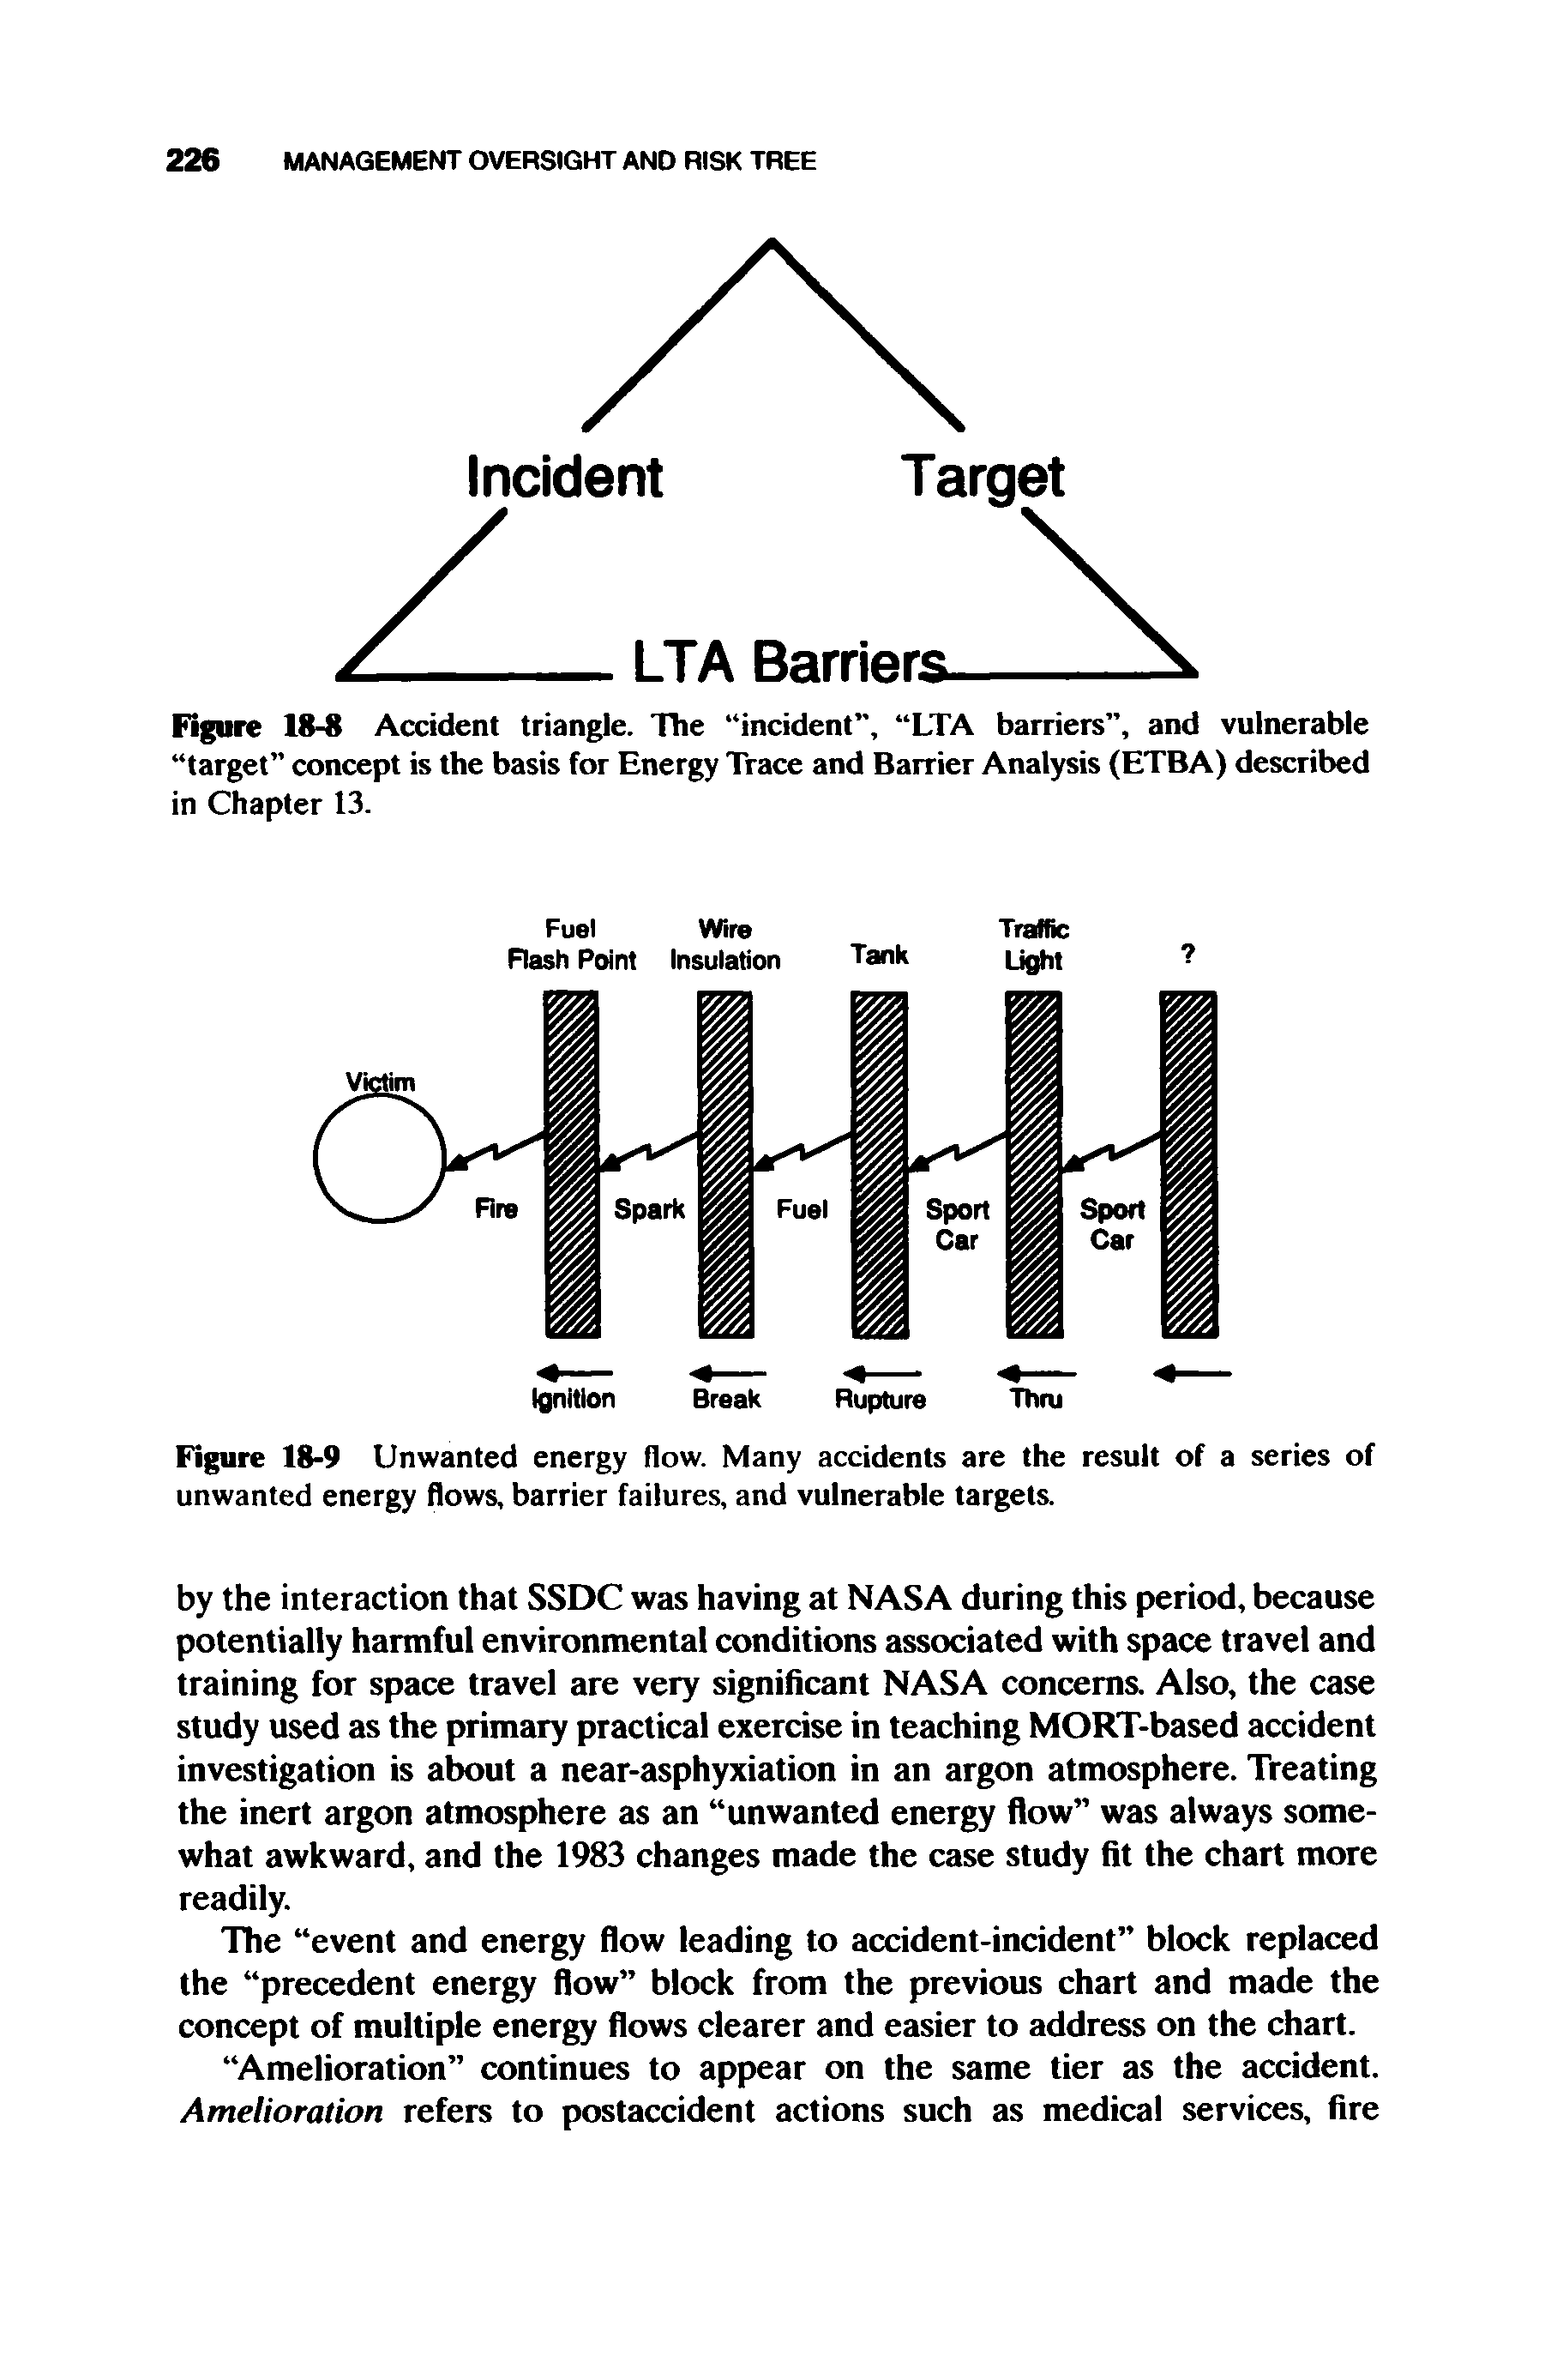 Figure 18-9 Unwanted energy flow. Many accidents are the result of a series of unwanted energy flows, barrier failures, and vulnerable targets.